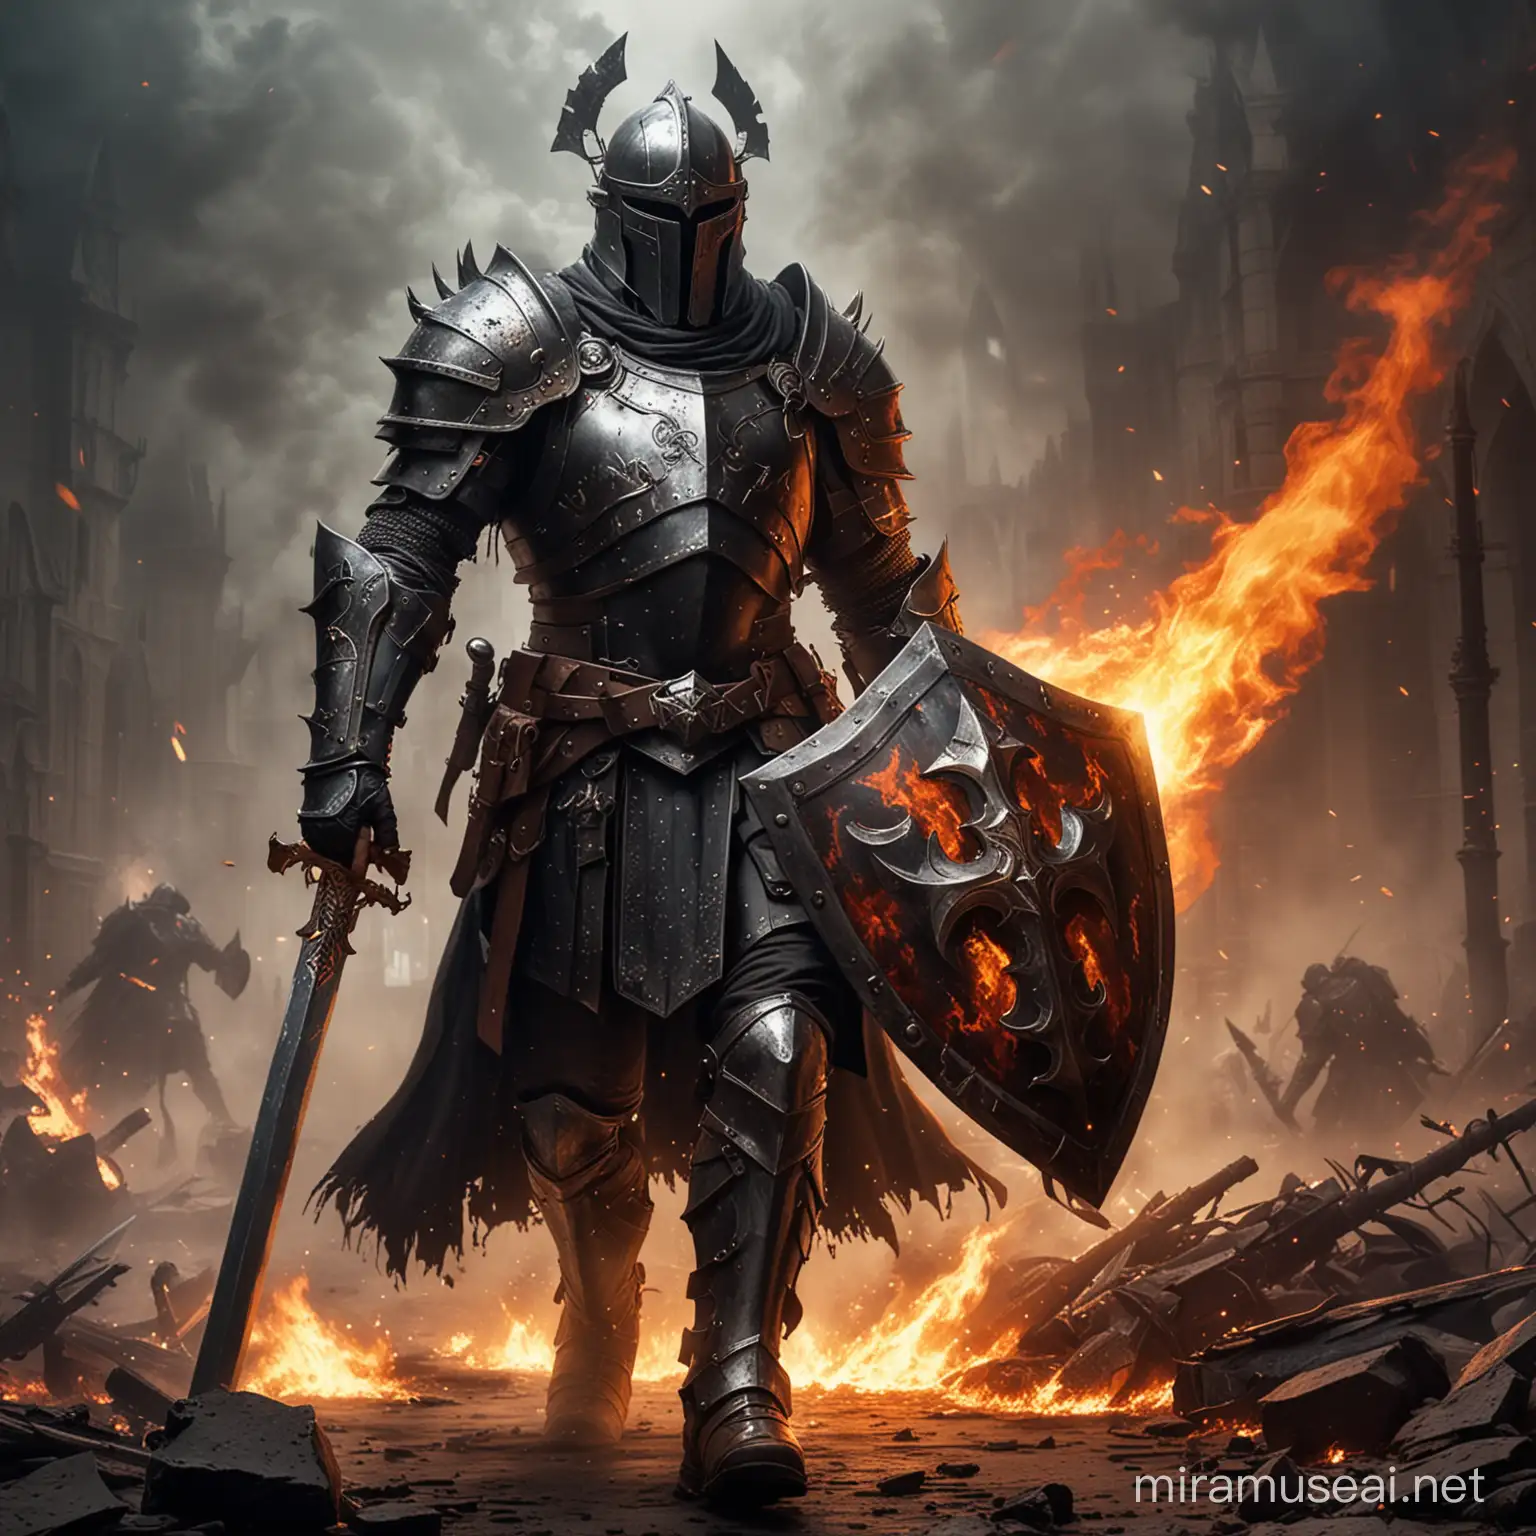 a fallen paladin, man with dark armor with dark flaming sword and a shield on back, also wearing a crusader's helm